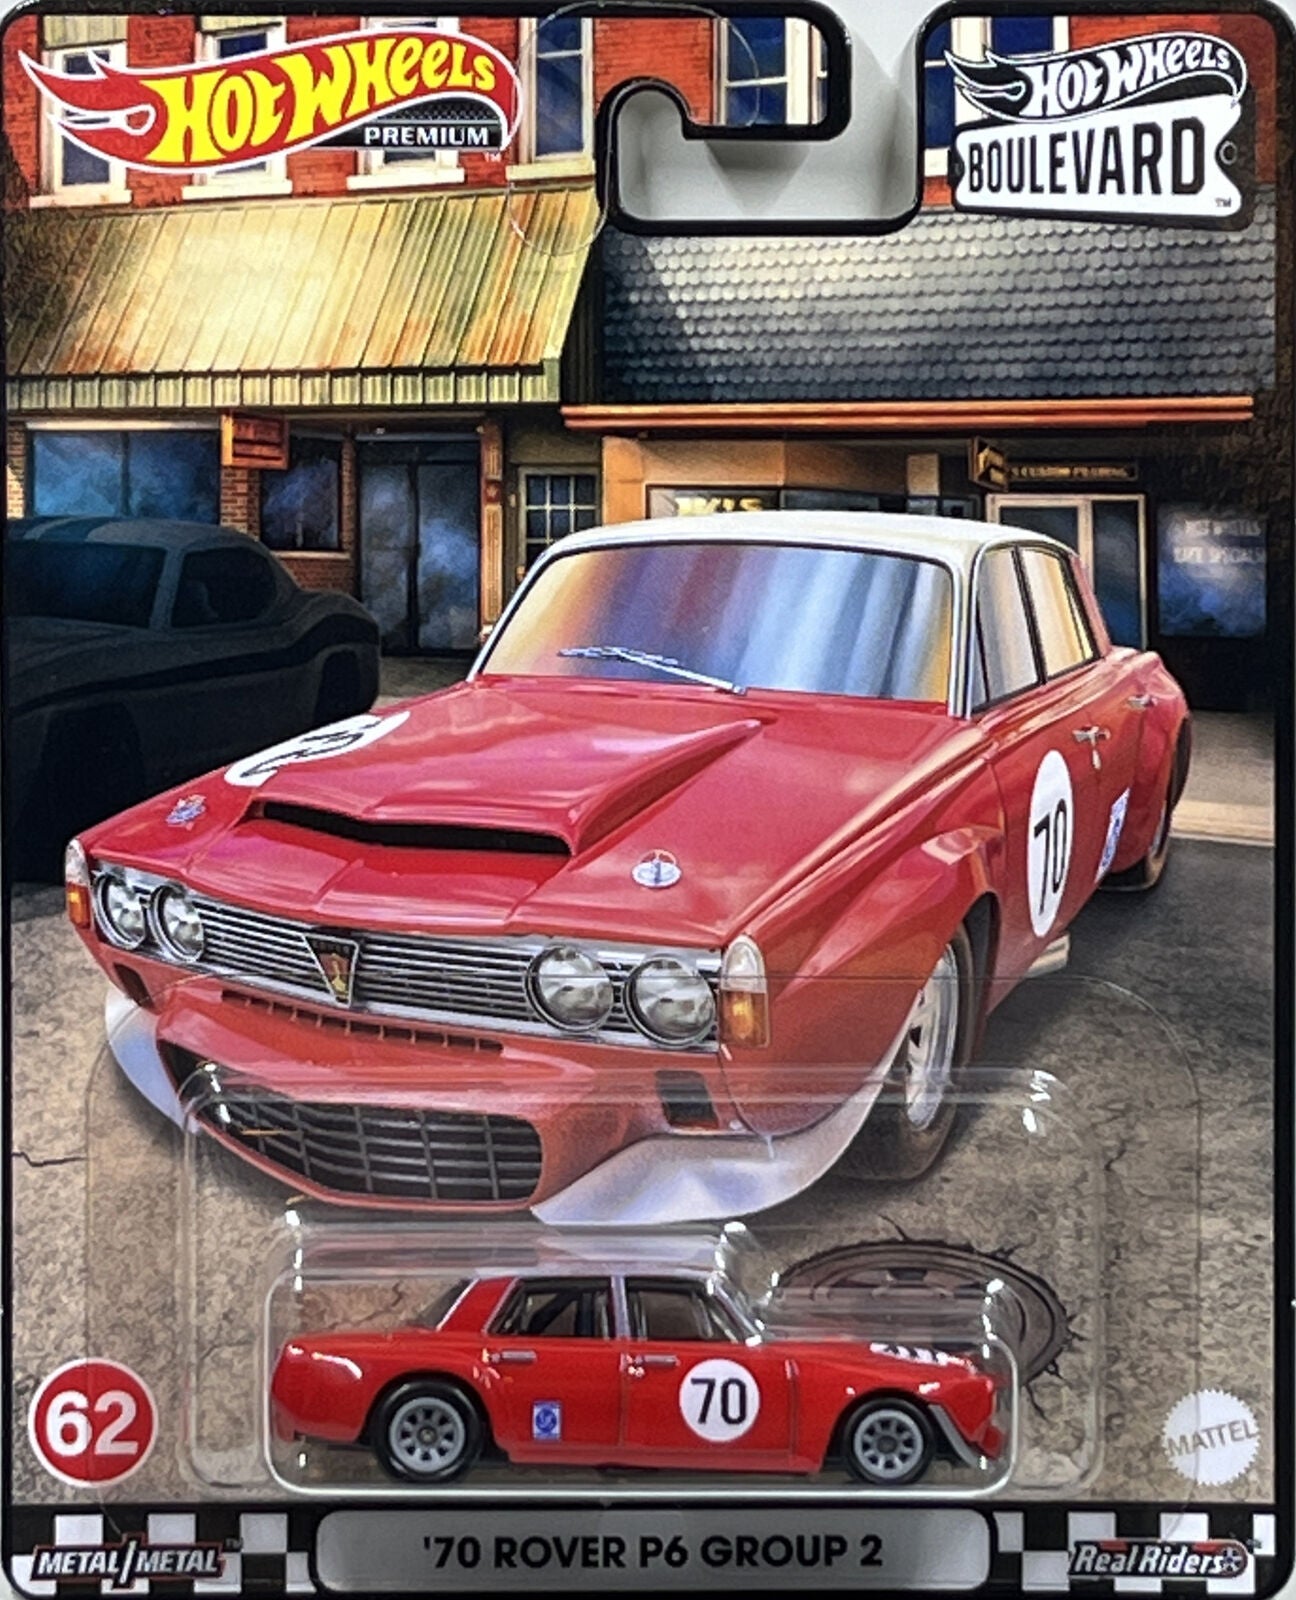 Hot Wheels Boulevard 70 Rover P6 Group 2 Red 1:64